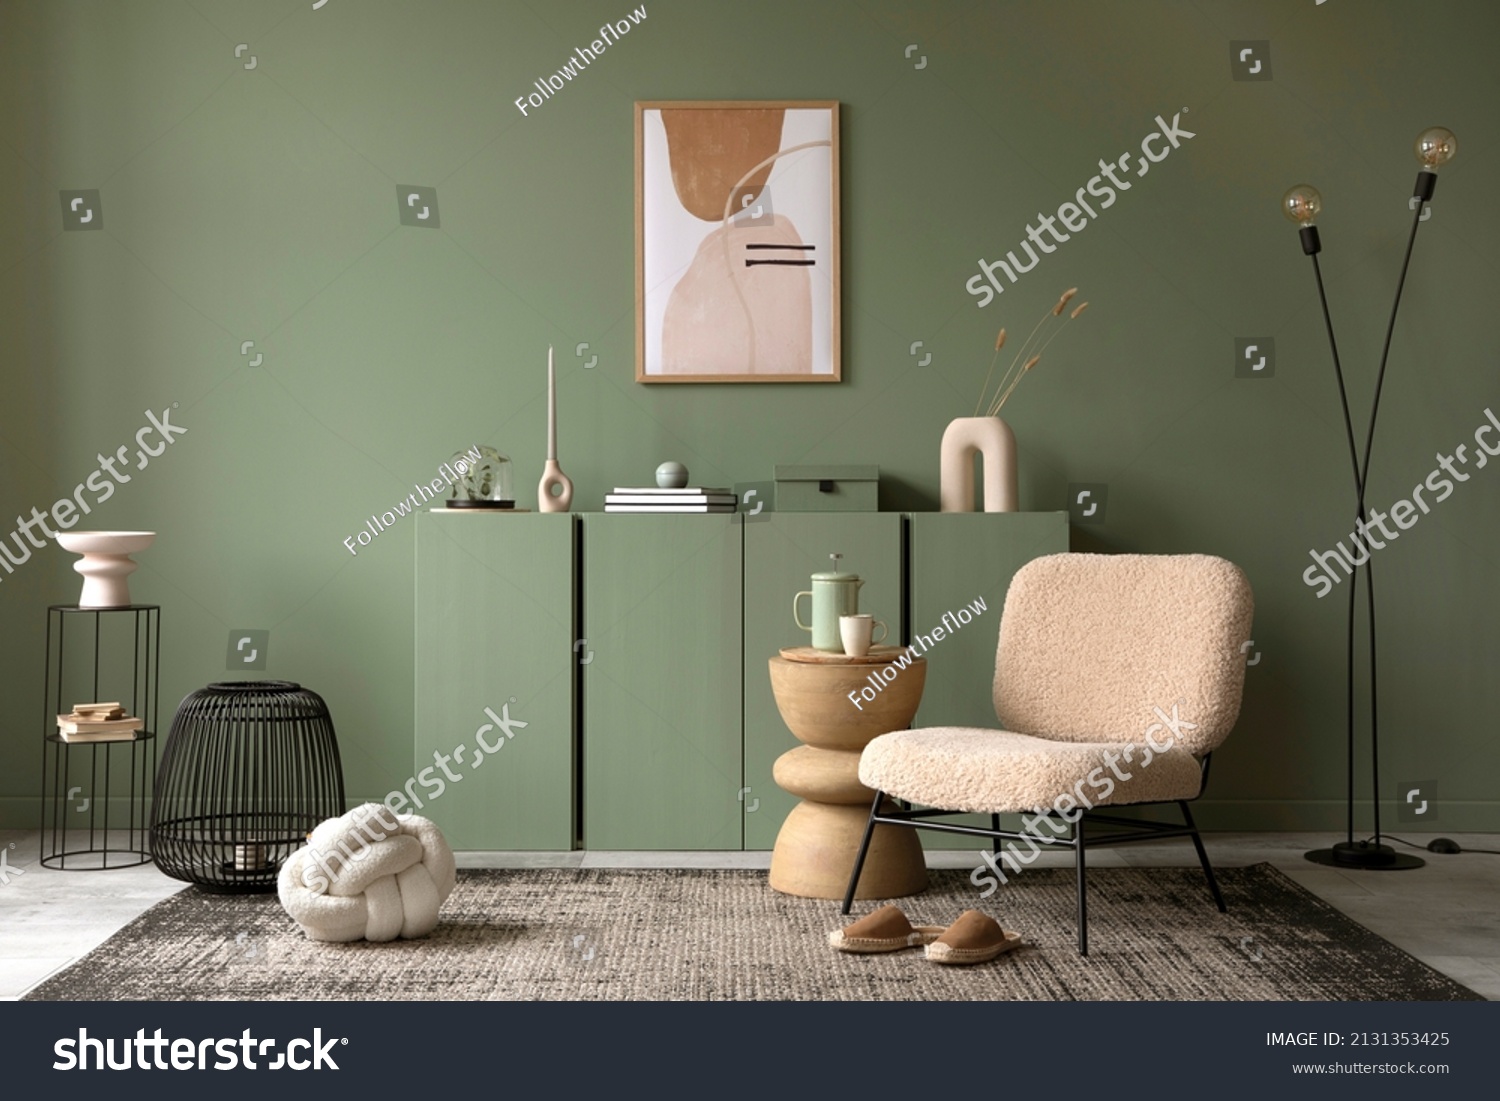 Stylish living room interior design with mock up poster frame, frotte armchair, wooden commode, side table, plants and creative home accessories. Sage green wall. Home staging. Template. Copy space. #2131353425